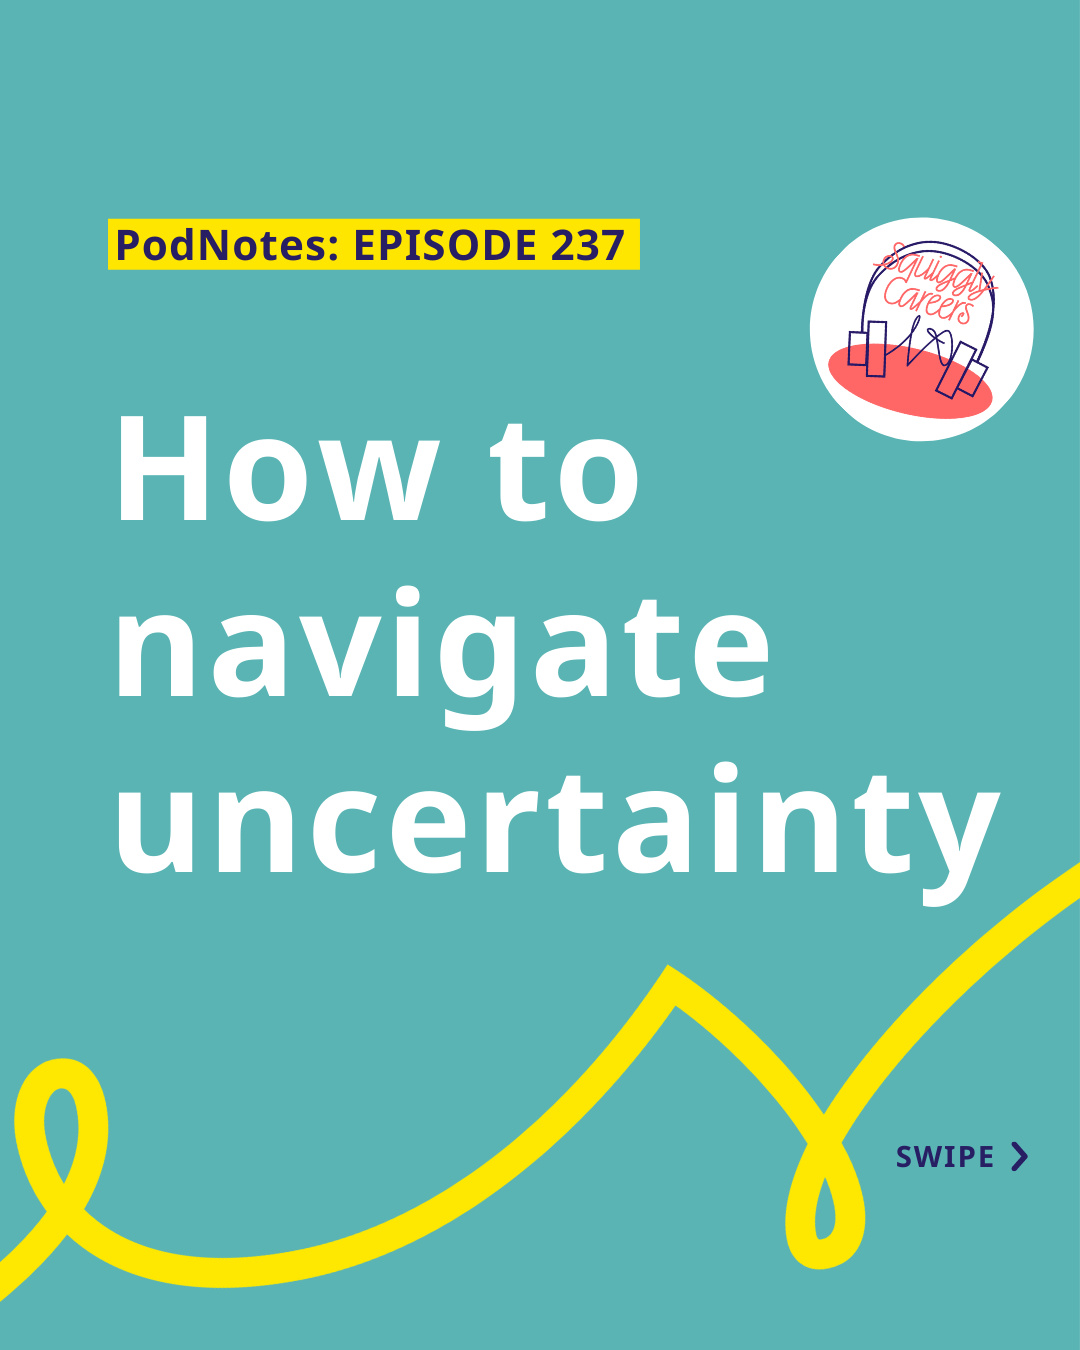 How to navigate uncertainty